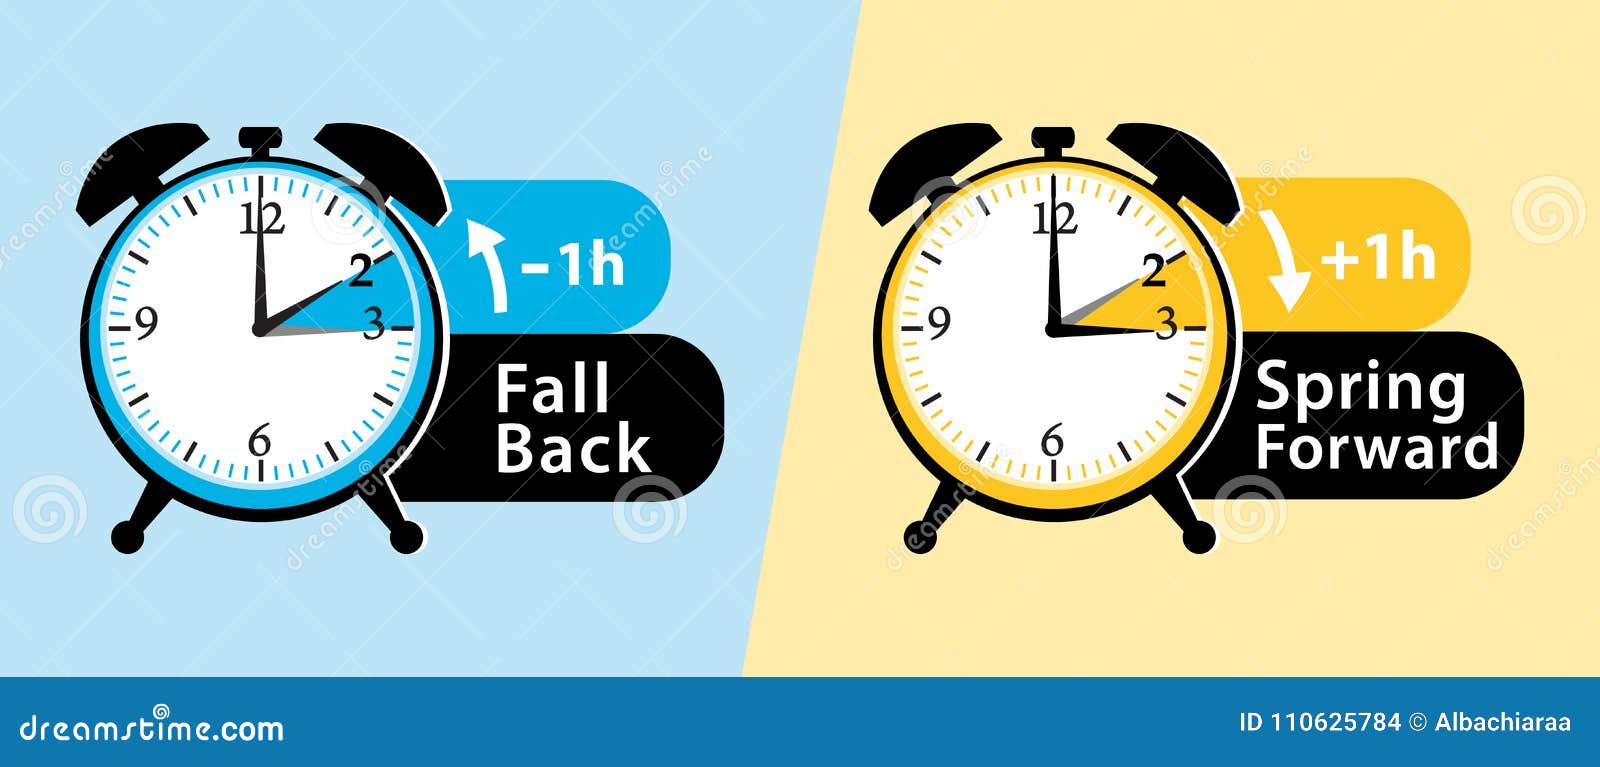 daylight saving time date question. fall back and spring forward.